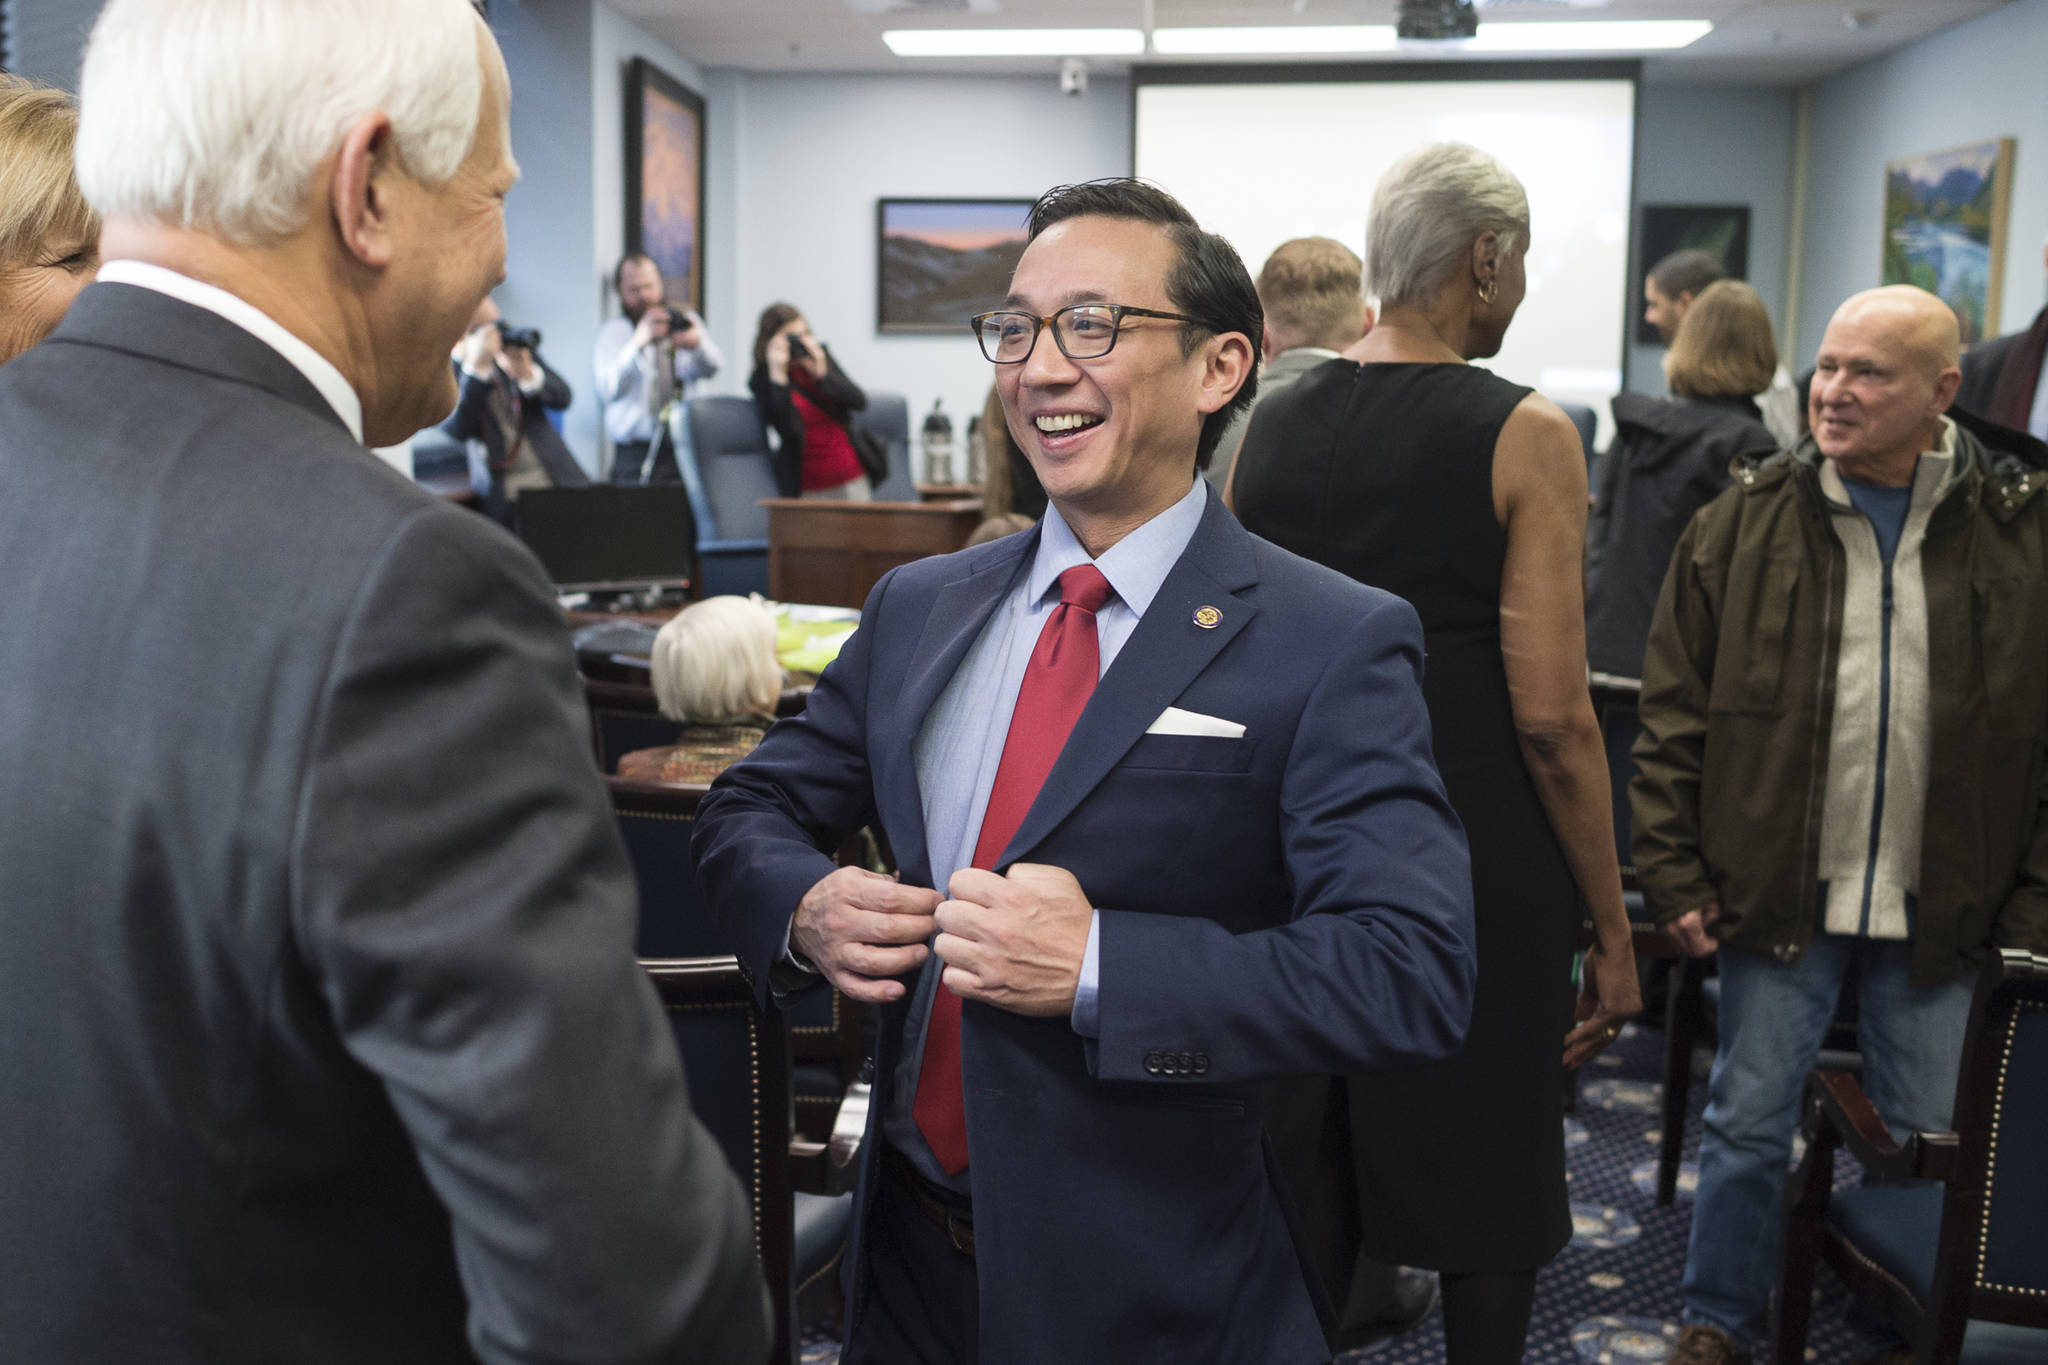 Sen. Scott Kawasaki, D-Fairbanks, gathers with other senators and families as they prepare for the opening of the Alaska’s 31st Legislative Session on Tuesday. (Michael Penn/Juneau Empire)